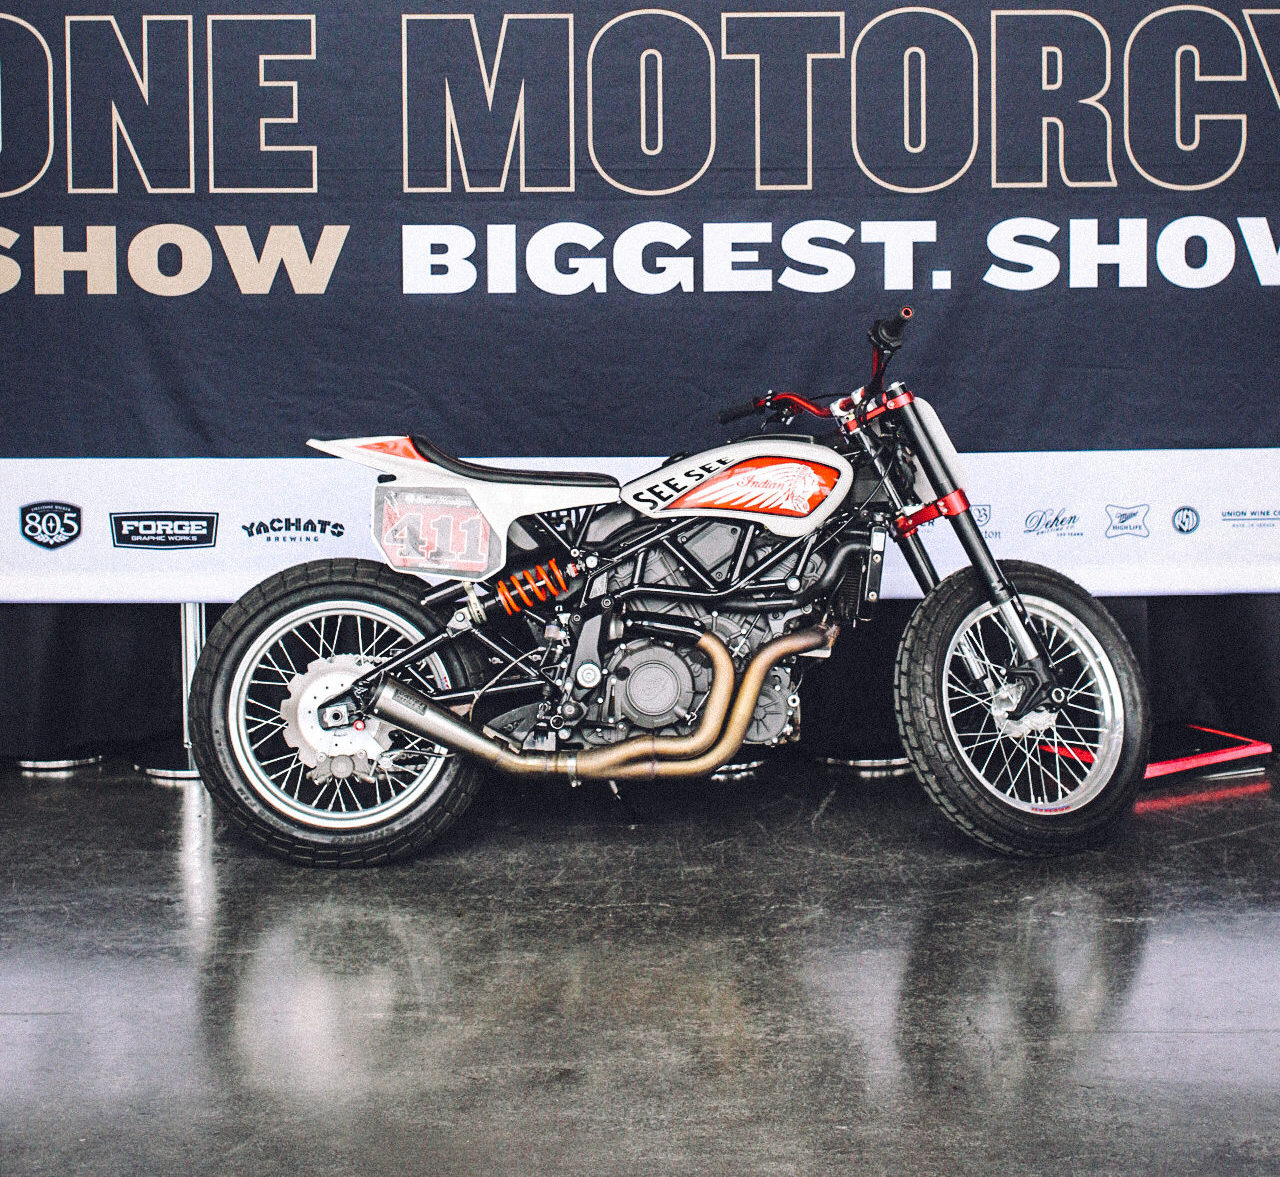 The One Motorcycle Show 2020